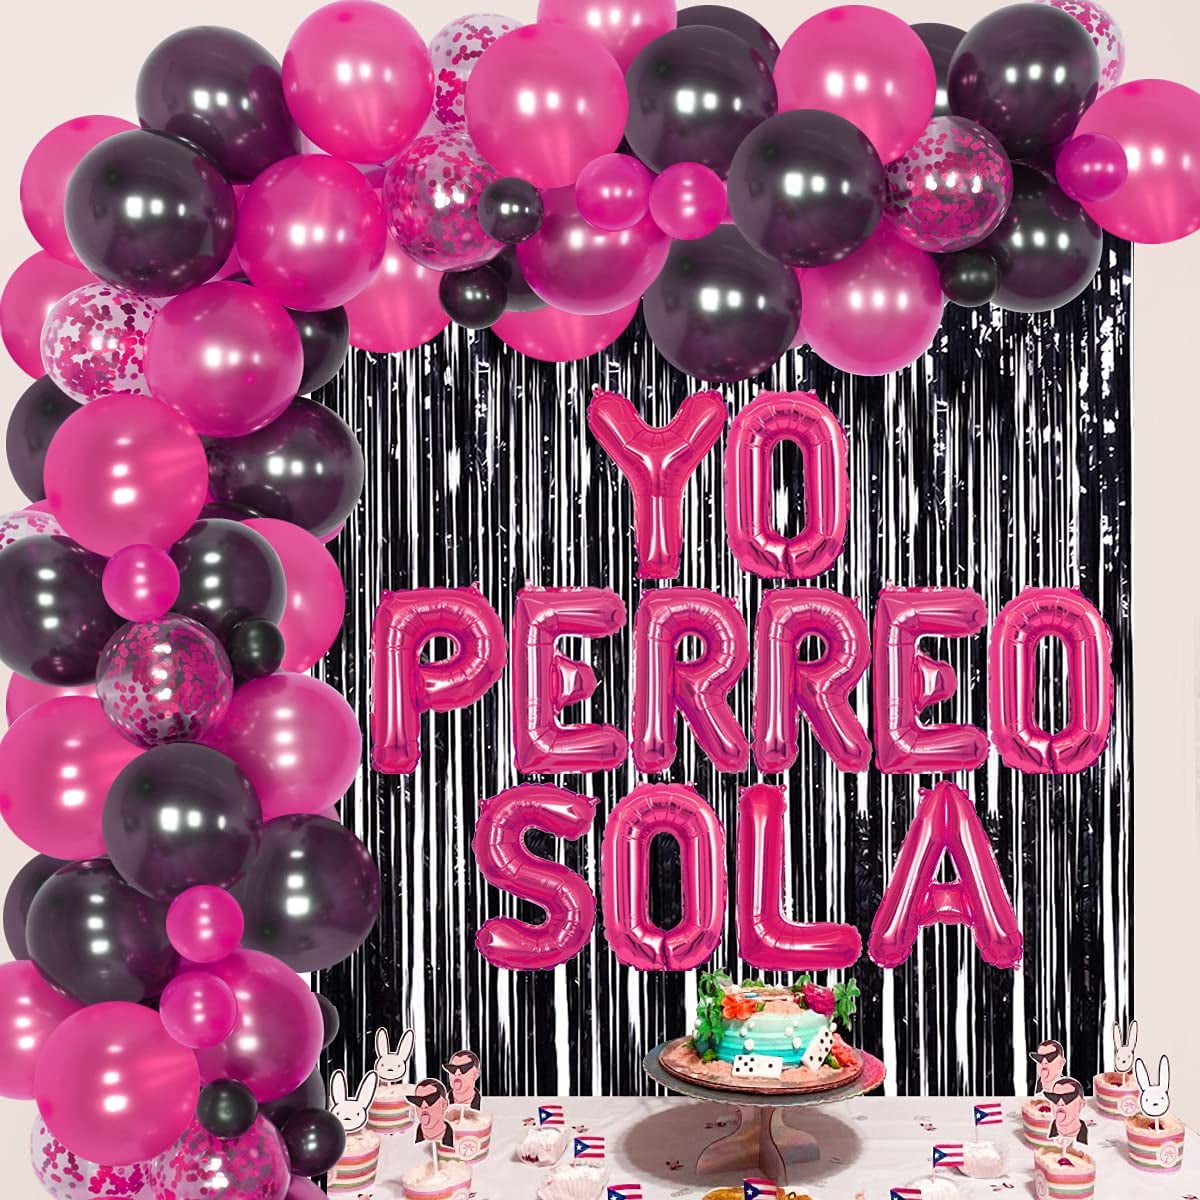 Bad Bunny Party Decorations Yo Perro Sola Balloon Banner Hot Pink and Black - Balloon Garland Arch Kit with Curtain for Graduation Birthday Anniversary Party Decorations - Walmart.com